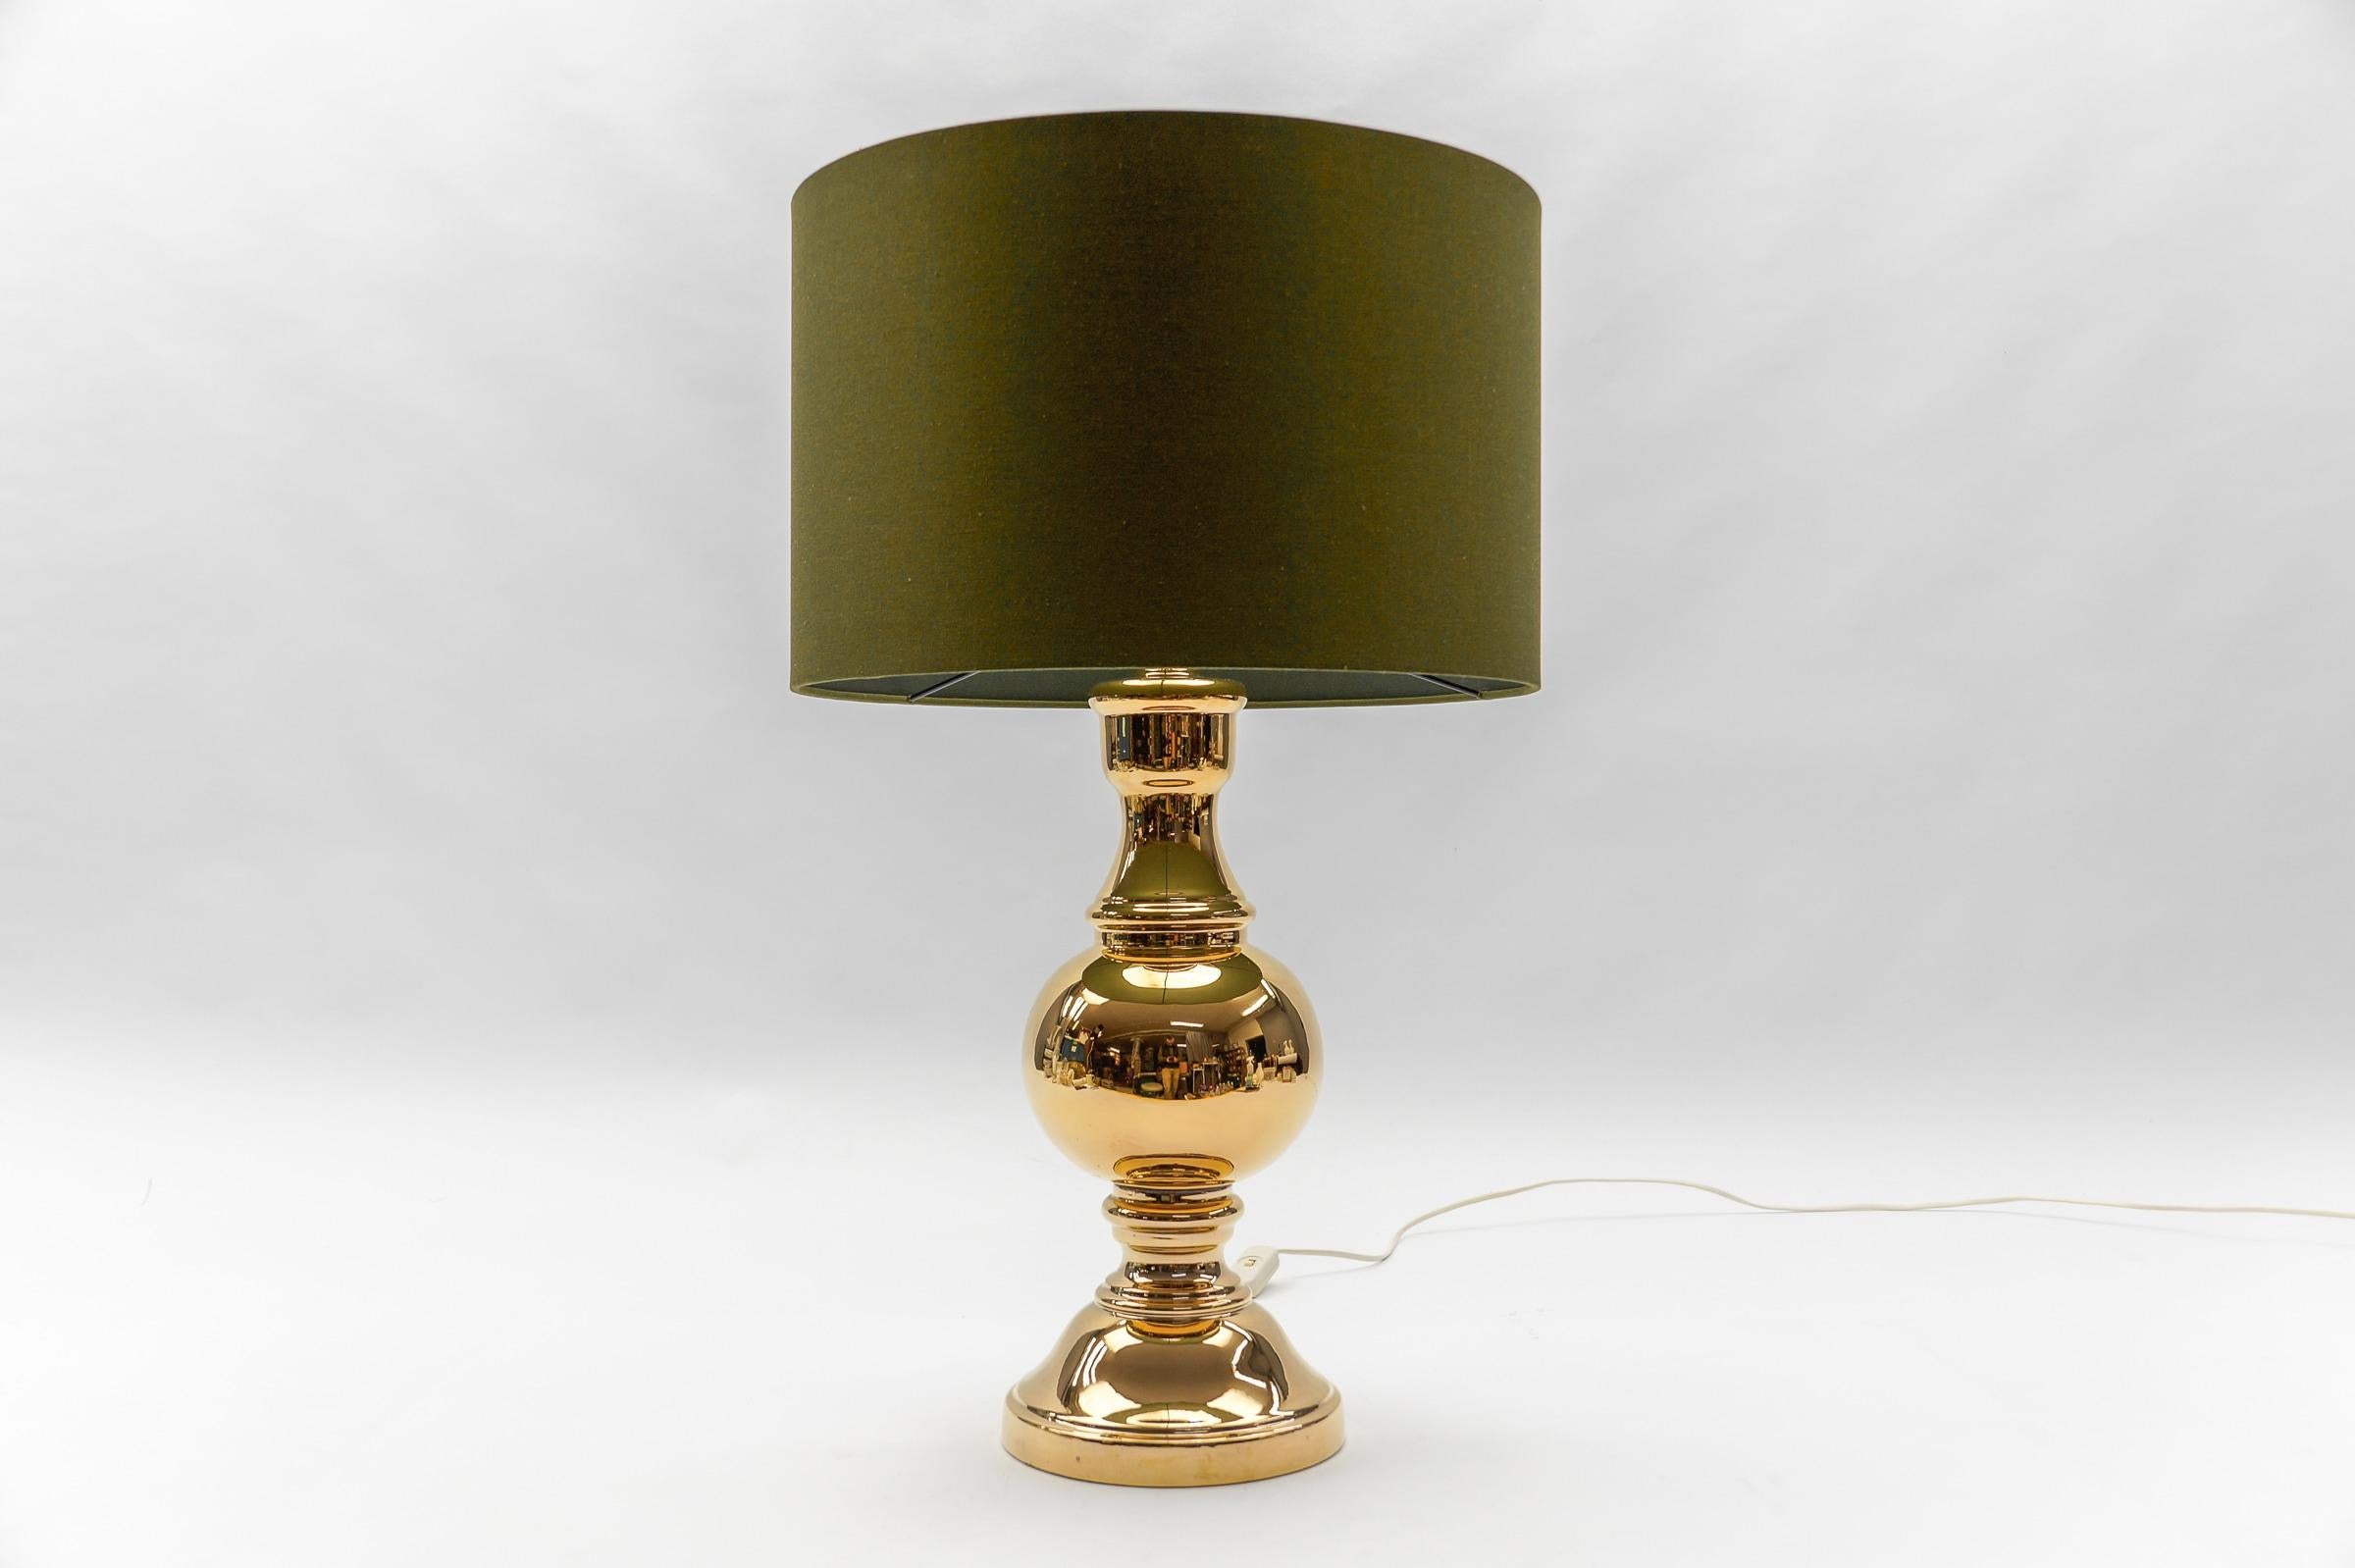 These ceramic table lamp was designed in the 1960s. 

The pictures with the lampshades are for illustration purposes and as an example of how the lamp bases look with a lampshade. These are not part of the offer.